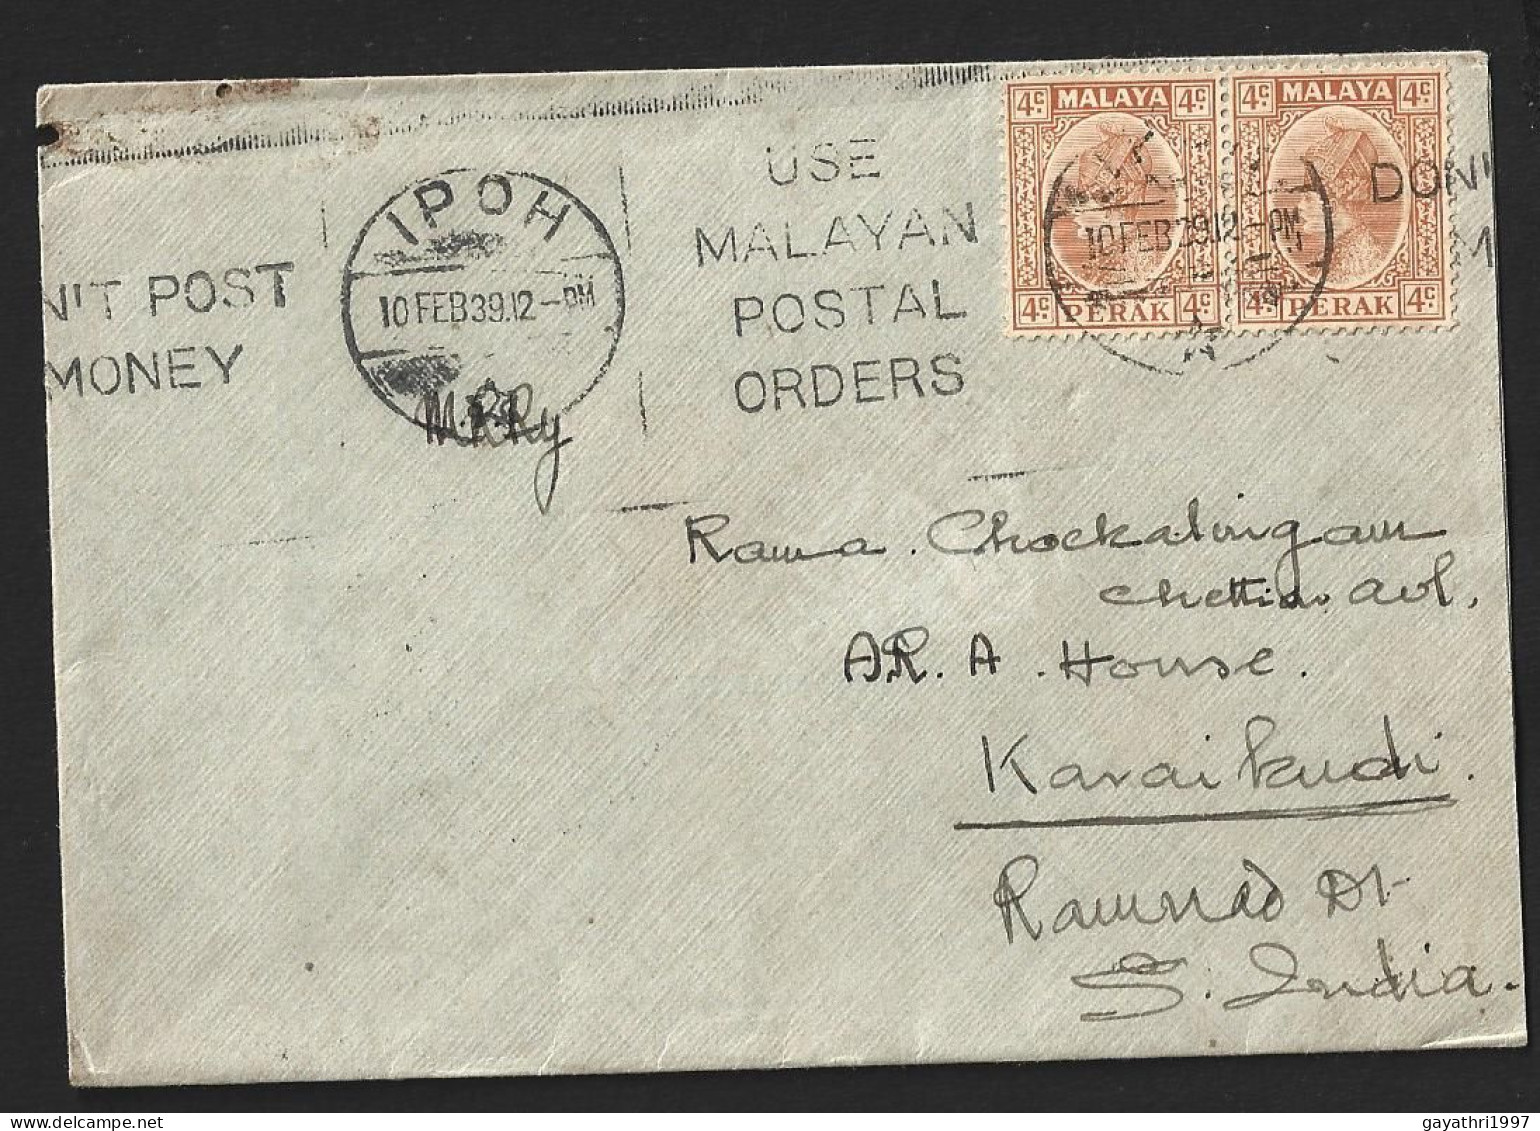 Malaya Perak Stamps On Cover From Ipoh To India With "use Malayan Postal Orders Slogan Cancellation (b16) - Perak